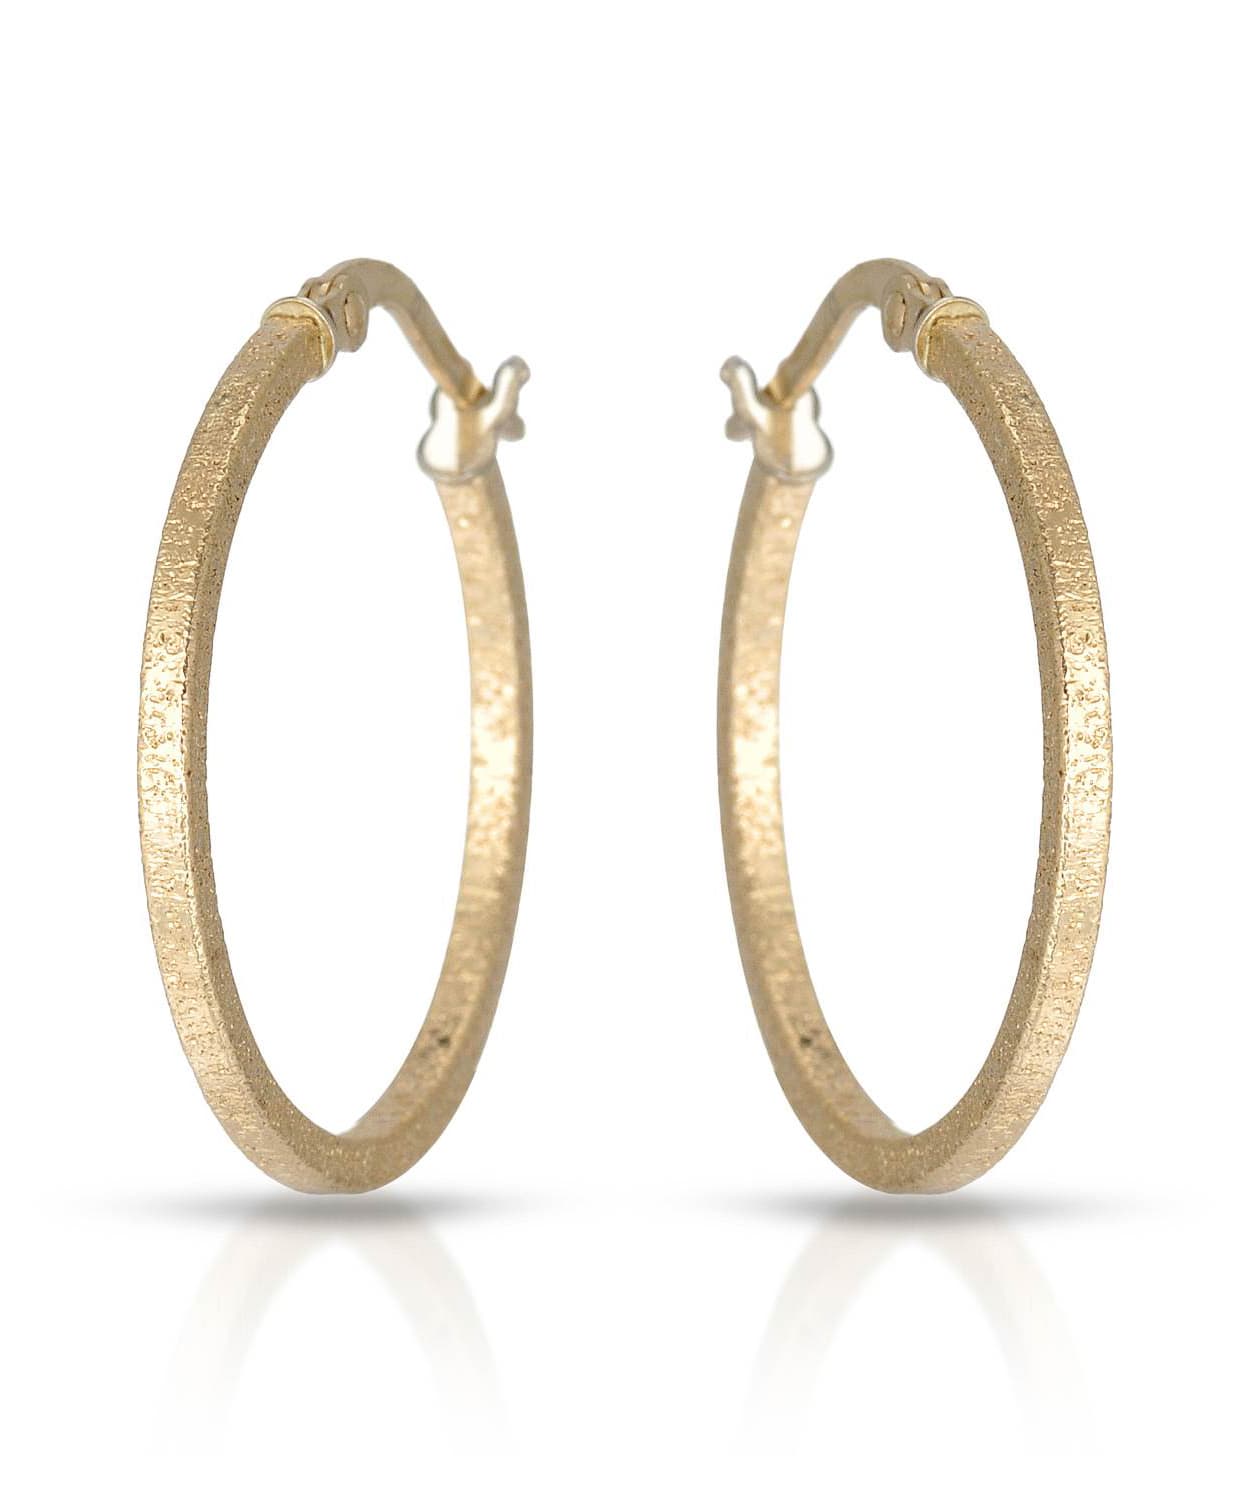 14k Yellow Gold Antique Style Hoop Earrings View 1